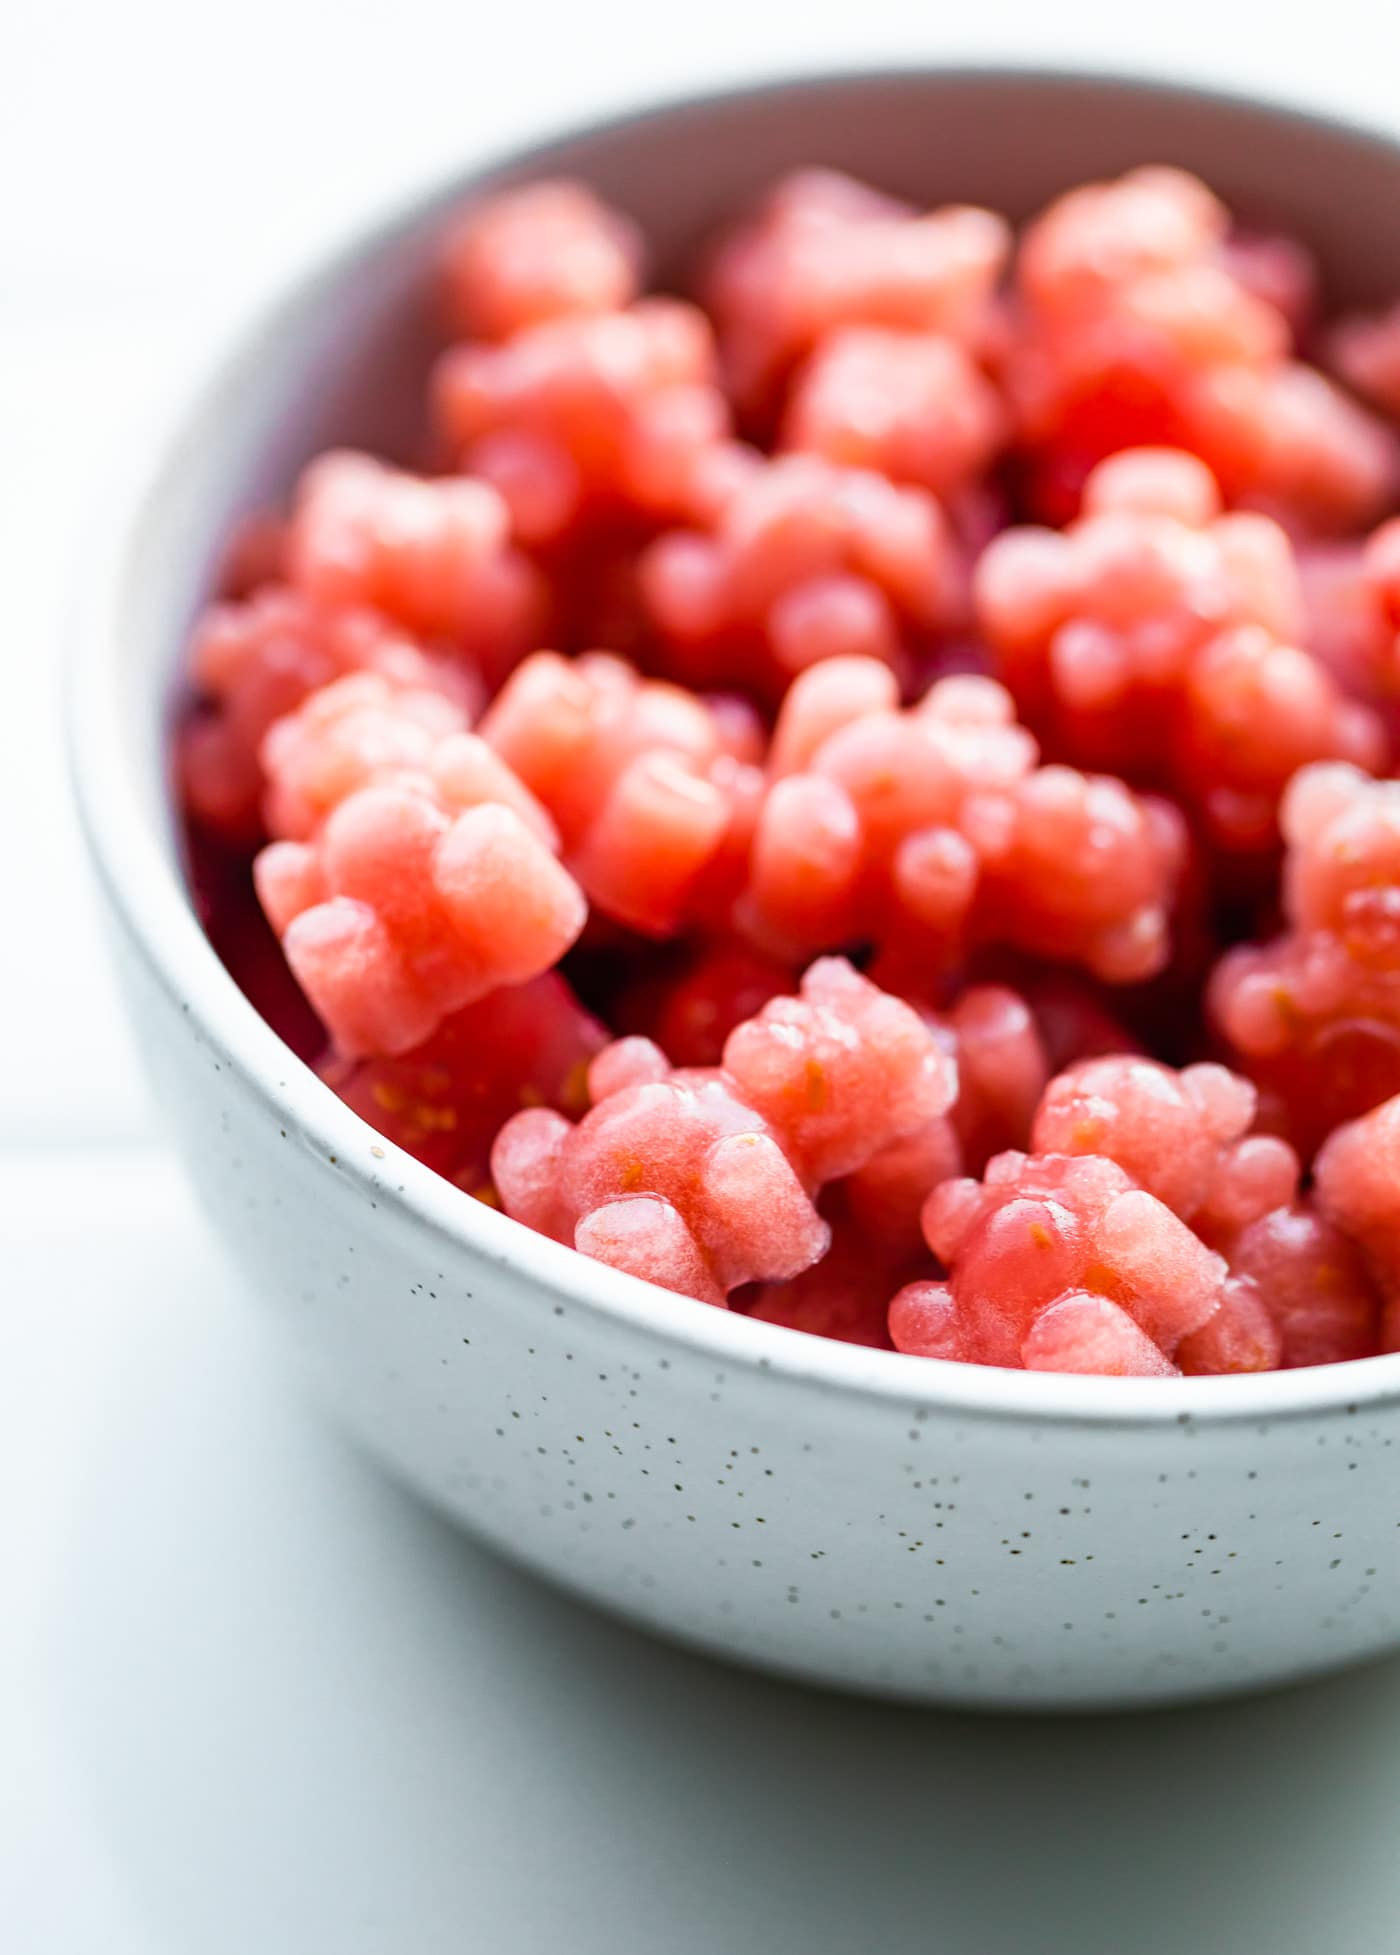 a close up image of a bowl of red homemade gummies with probiotics made in the shape of bears